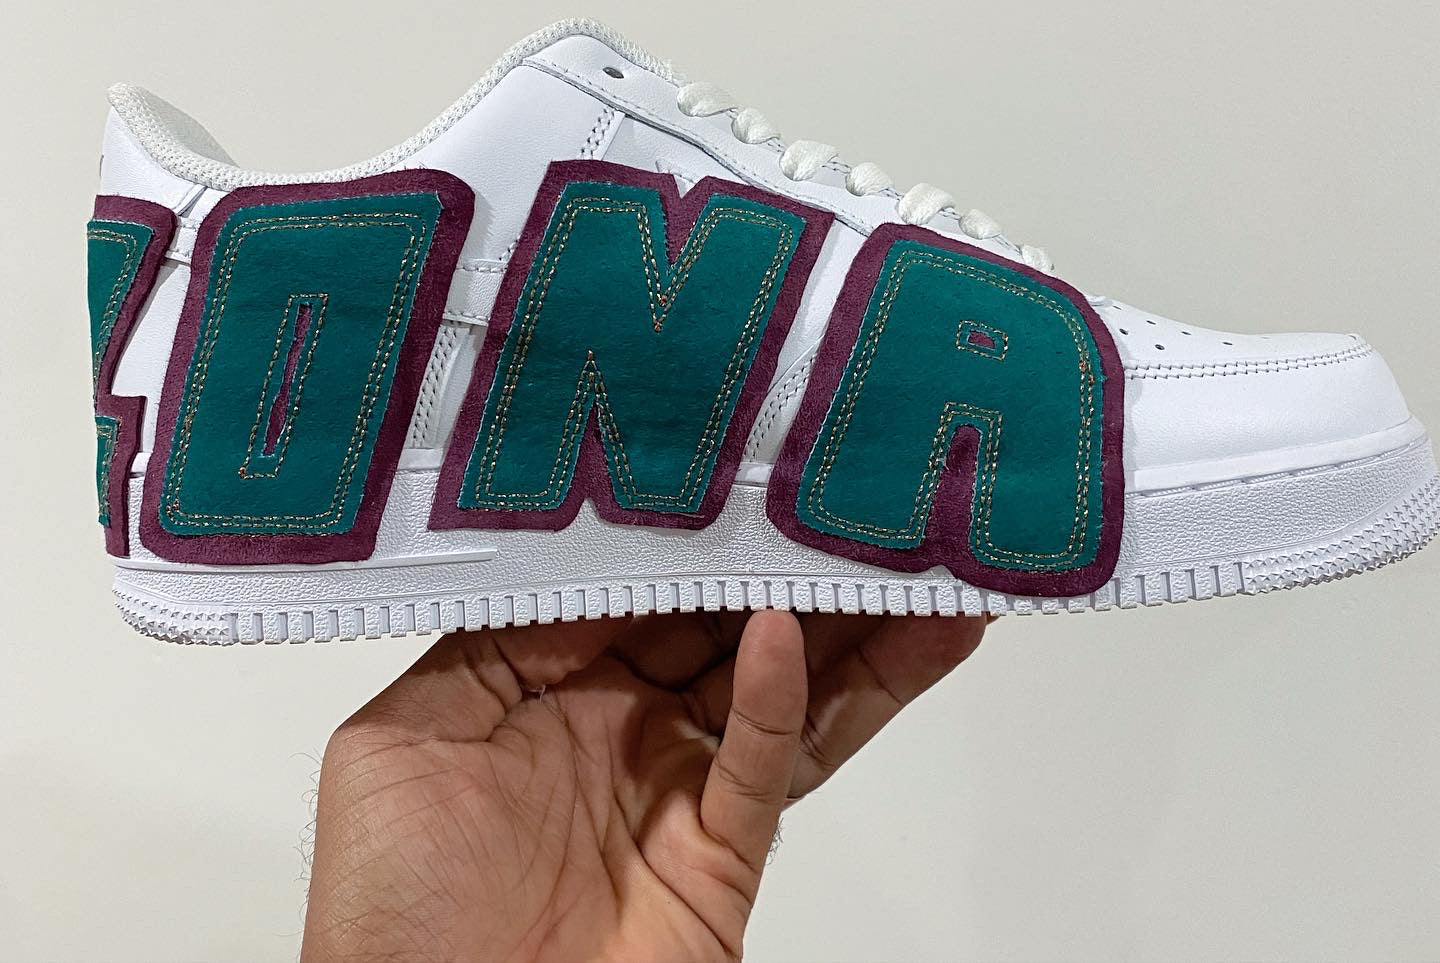 “AIR” ZONA Force One